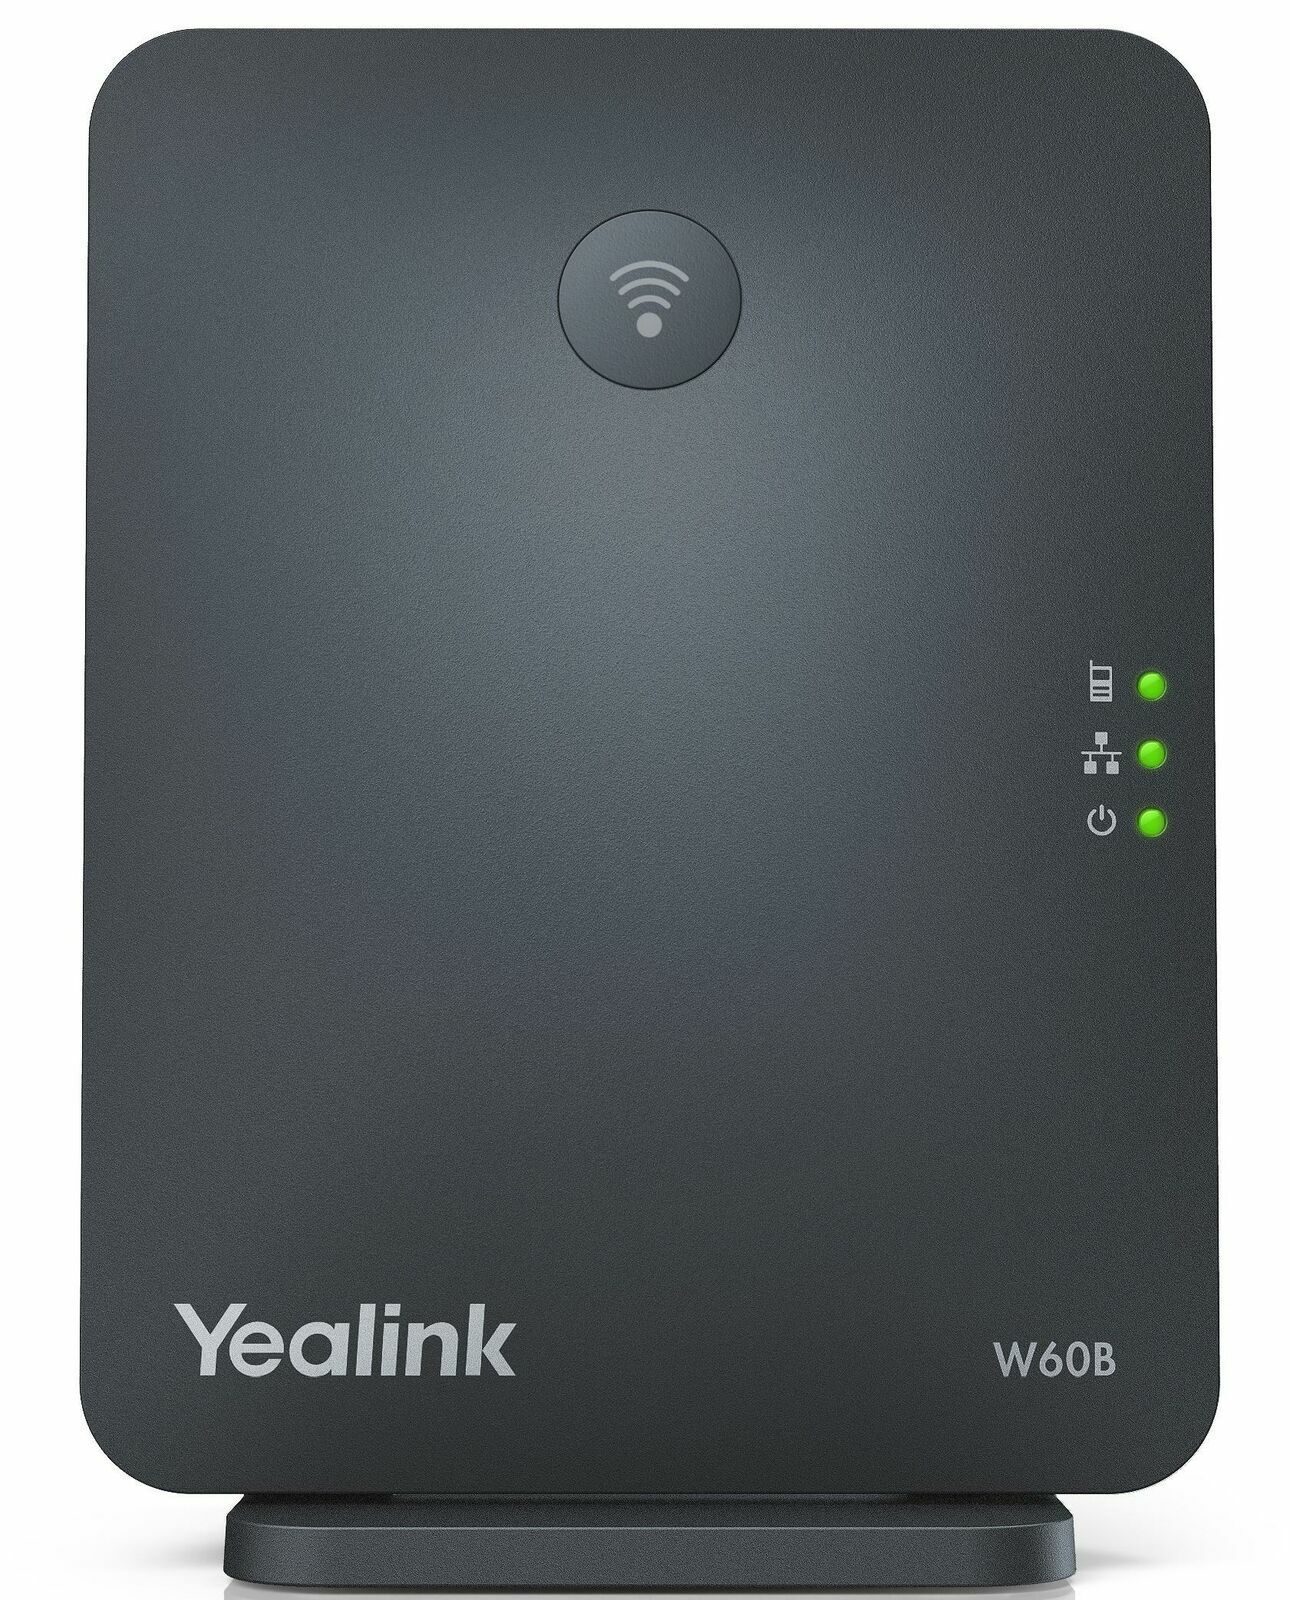 Yealink W60B 8 Line HD VoIP DECT IP Base Cordless Station NO STAND + Warranty